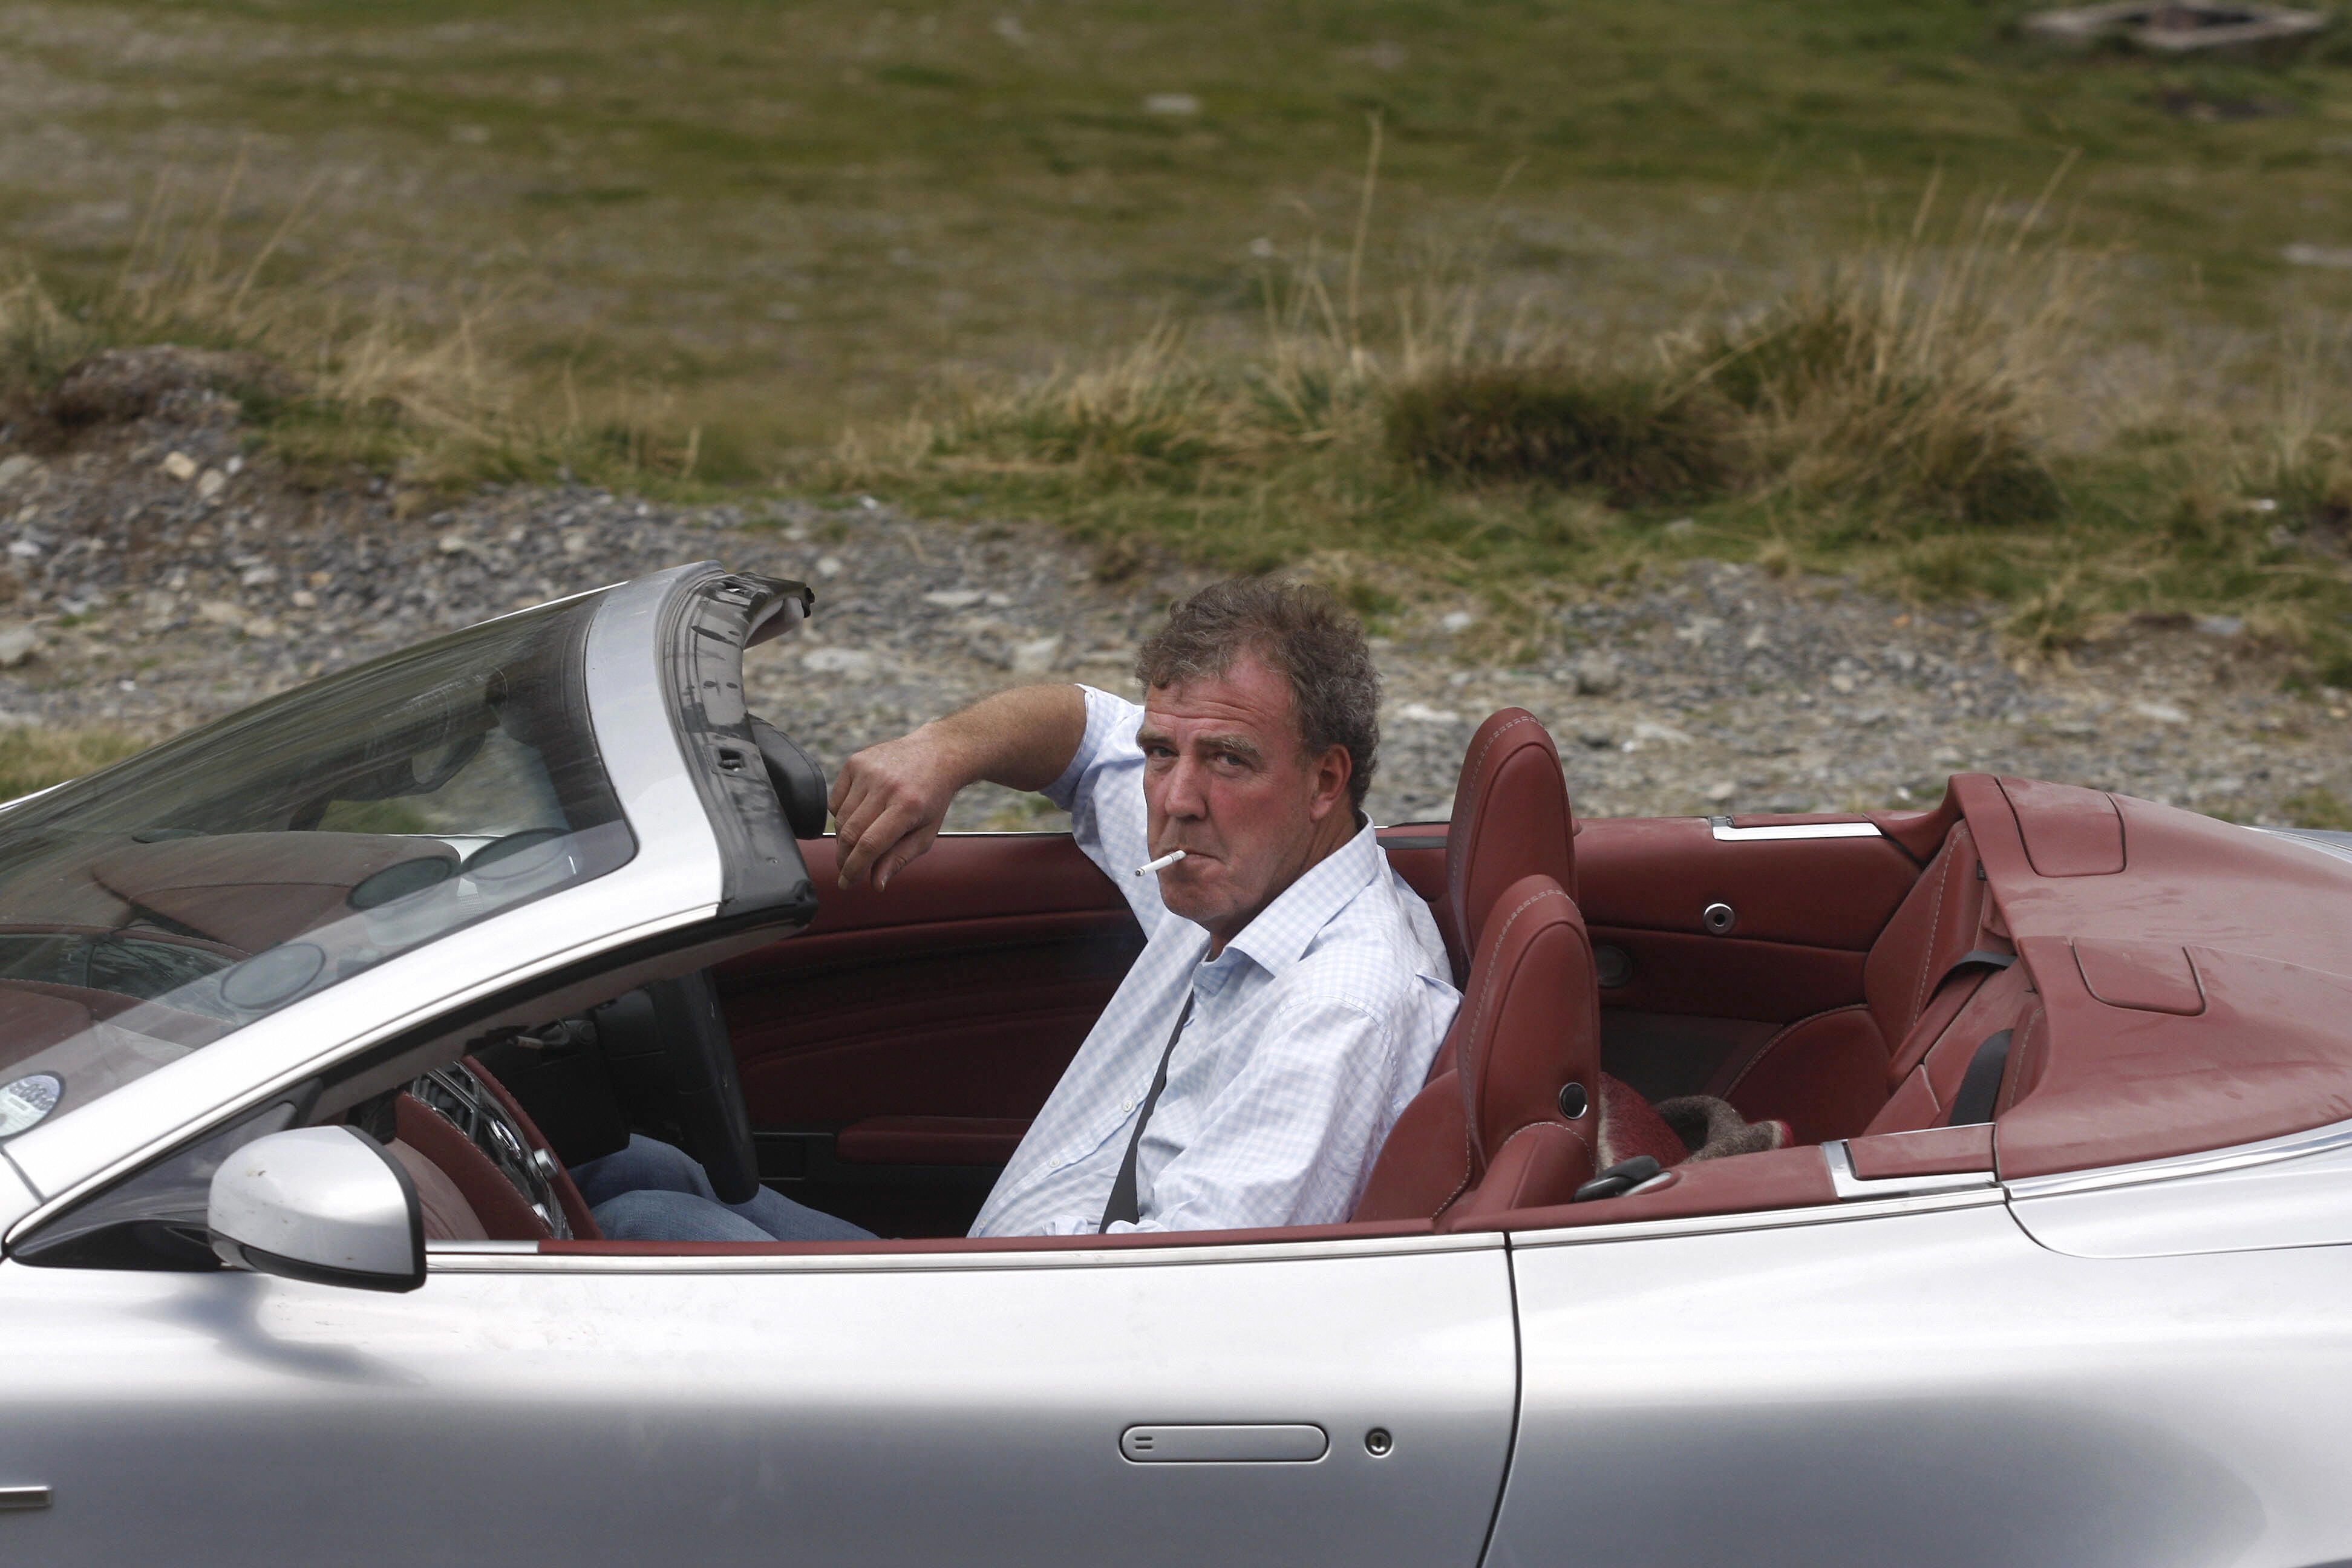 Jeremy Clarkson in car with cigarette